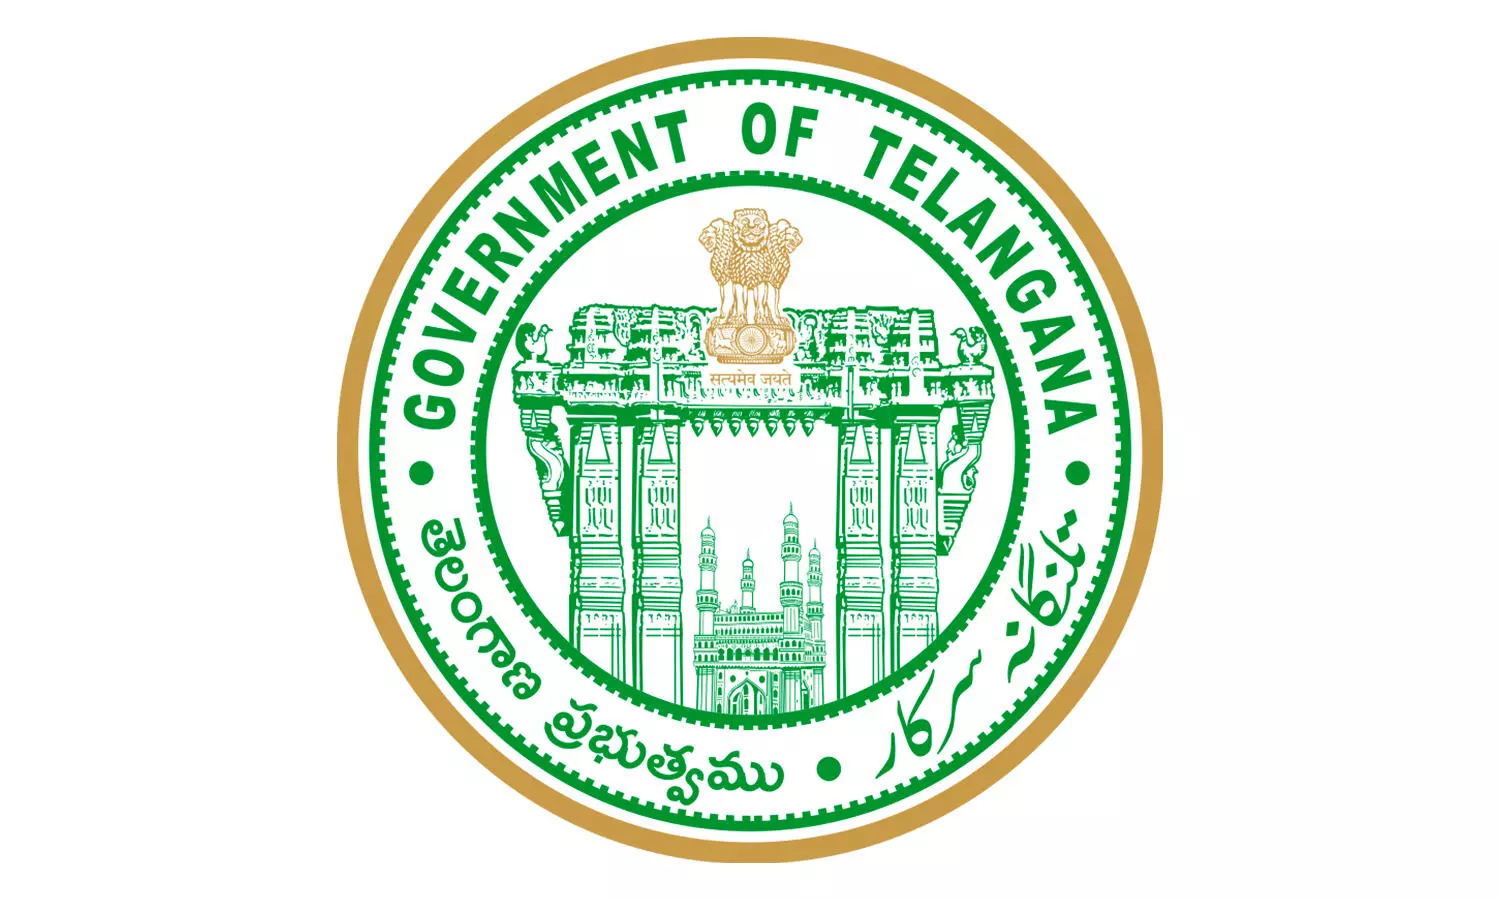 Telangana records highest GSDP growth rate in India at 11.97%